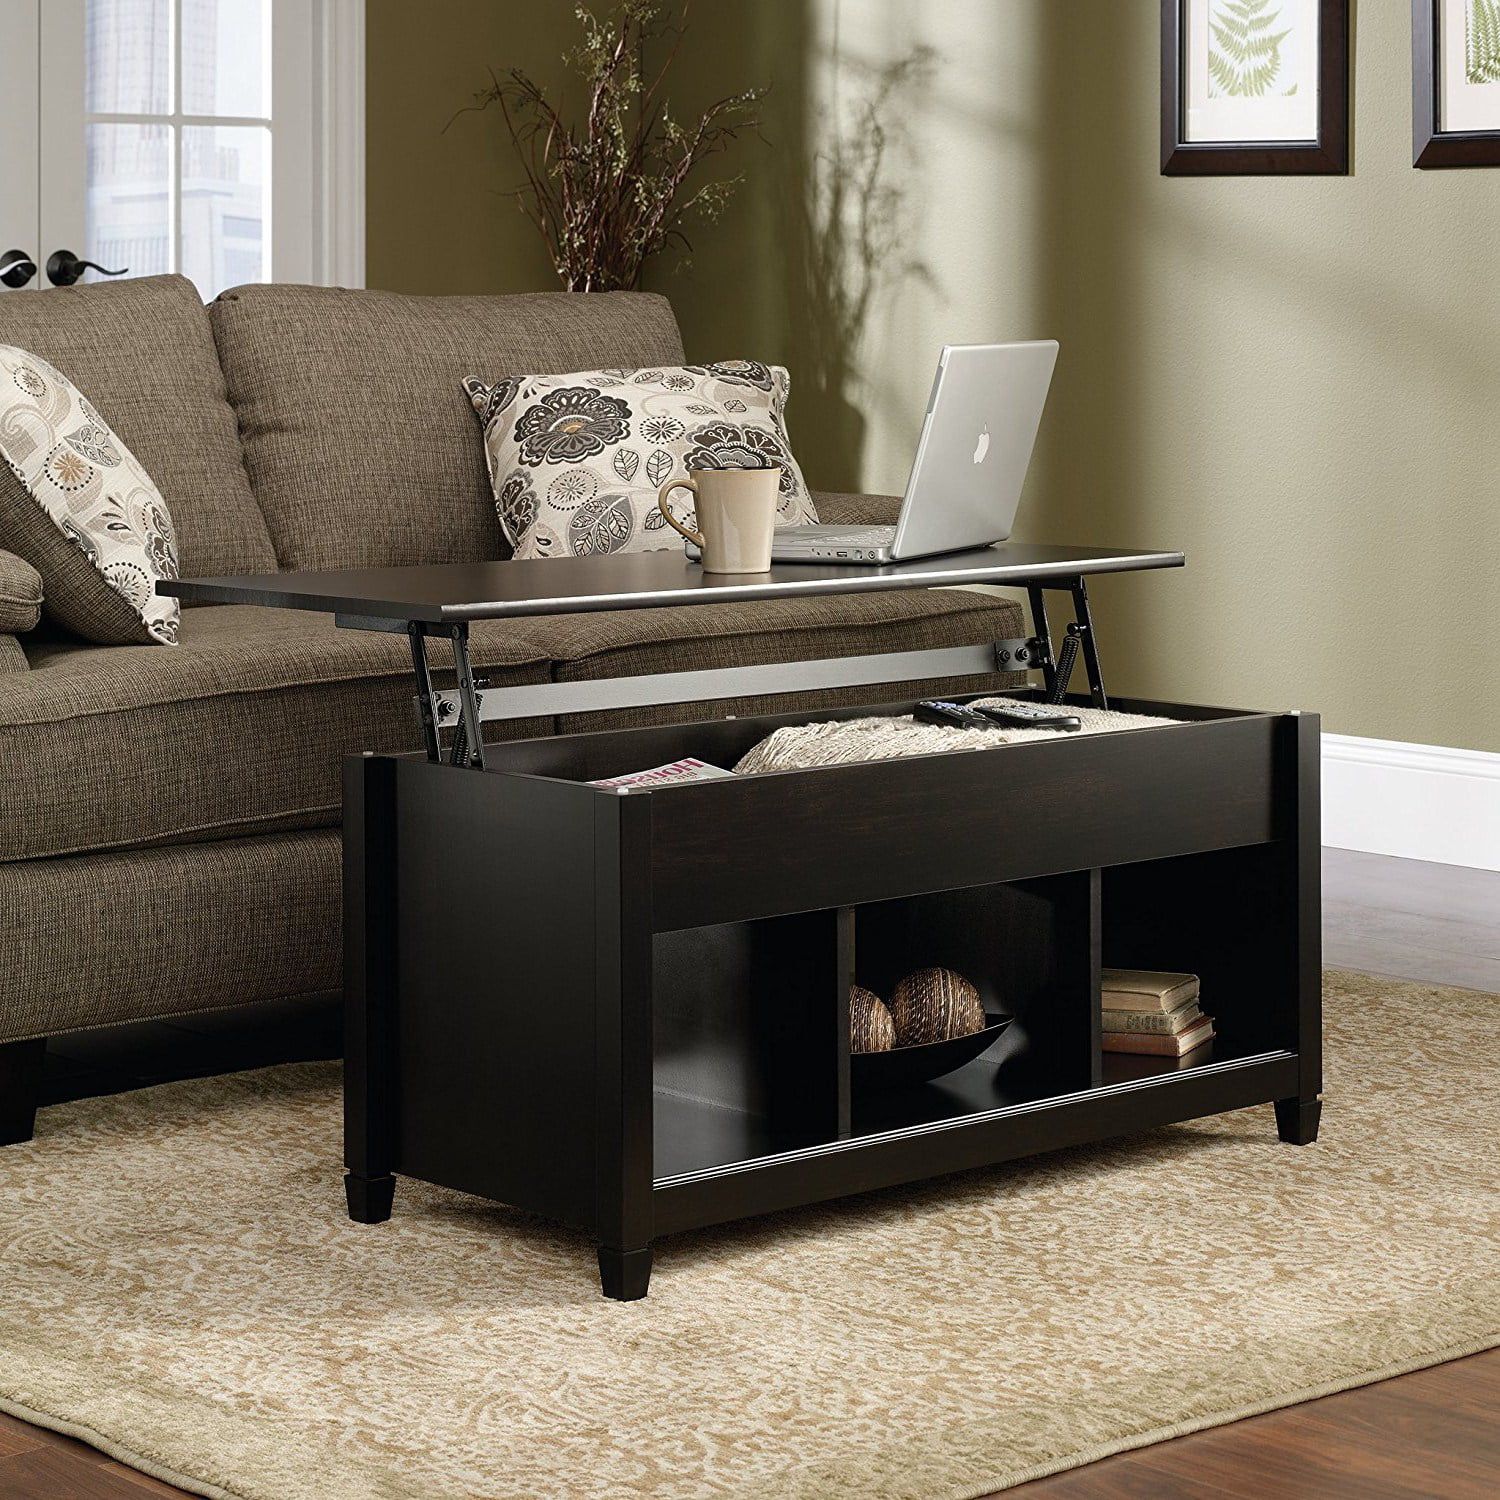 Zimtown Lift Up Top Coffee Table With Hidden Compartment End Rectangle Regarding Lift Top Coffee Tables With Hidden Storage Compartments (View 12 of 15)